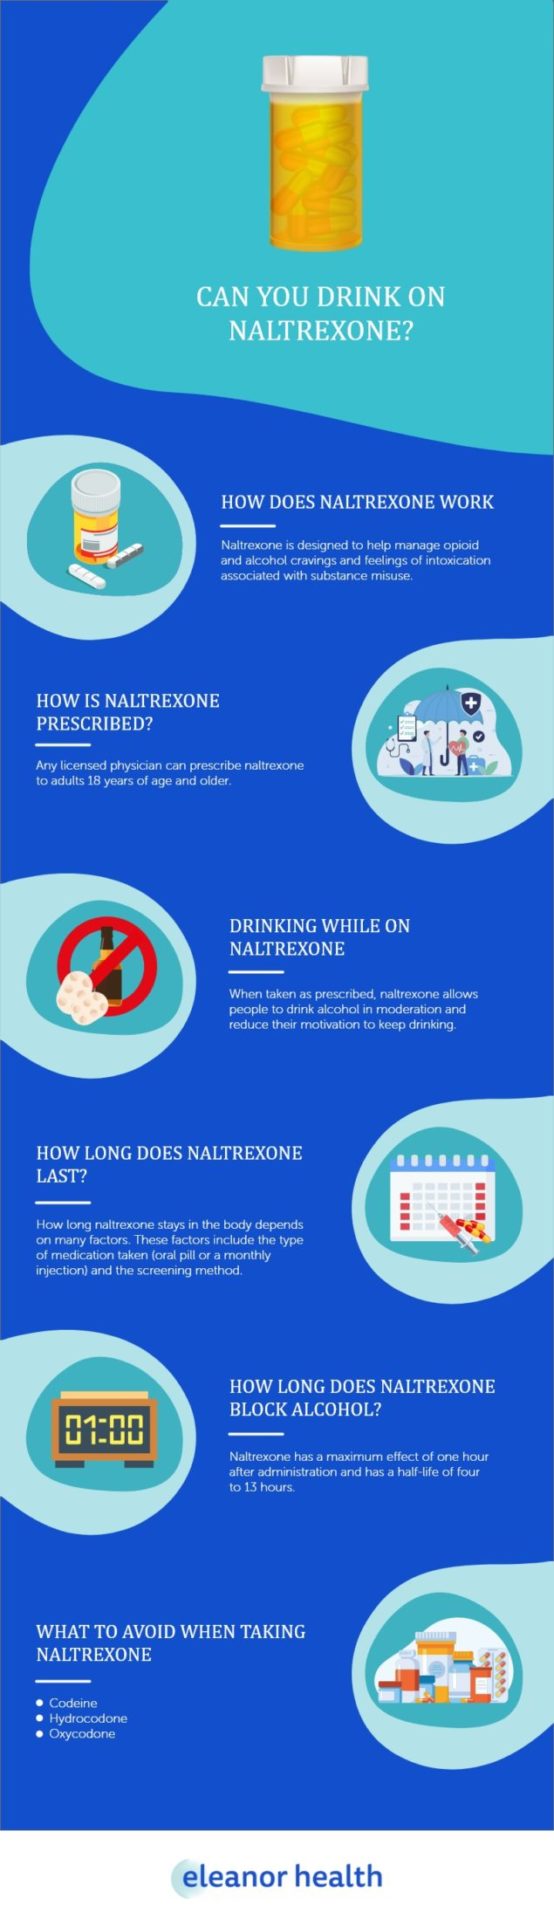 Can You Drink on Naltrexone - Eleanor Health